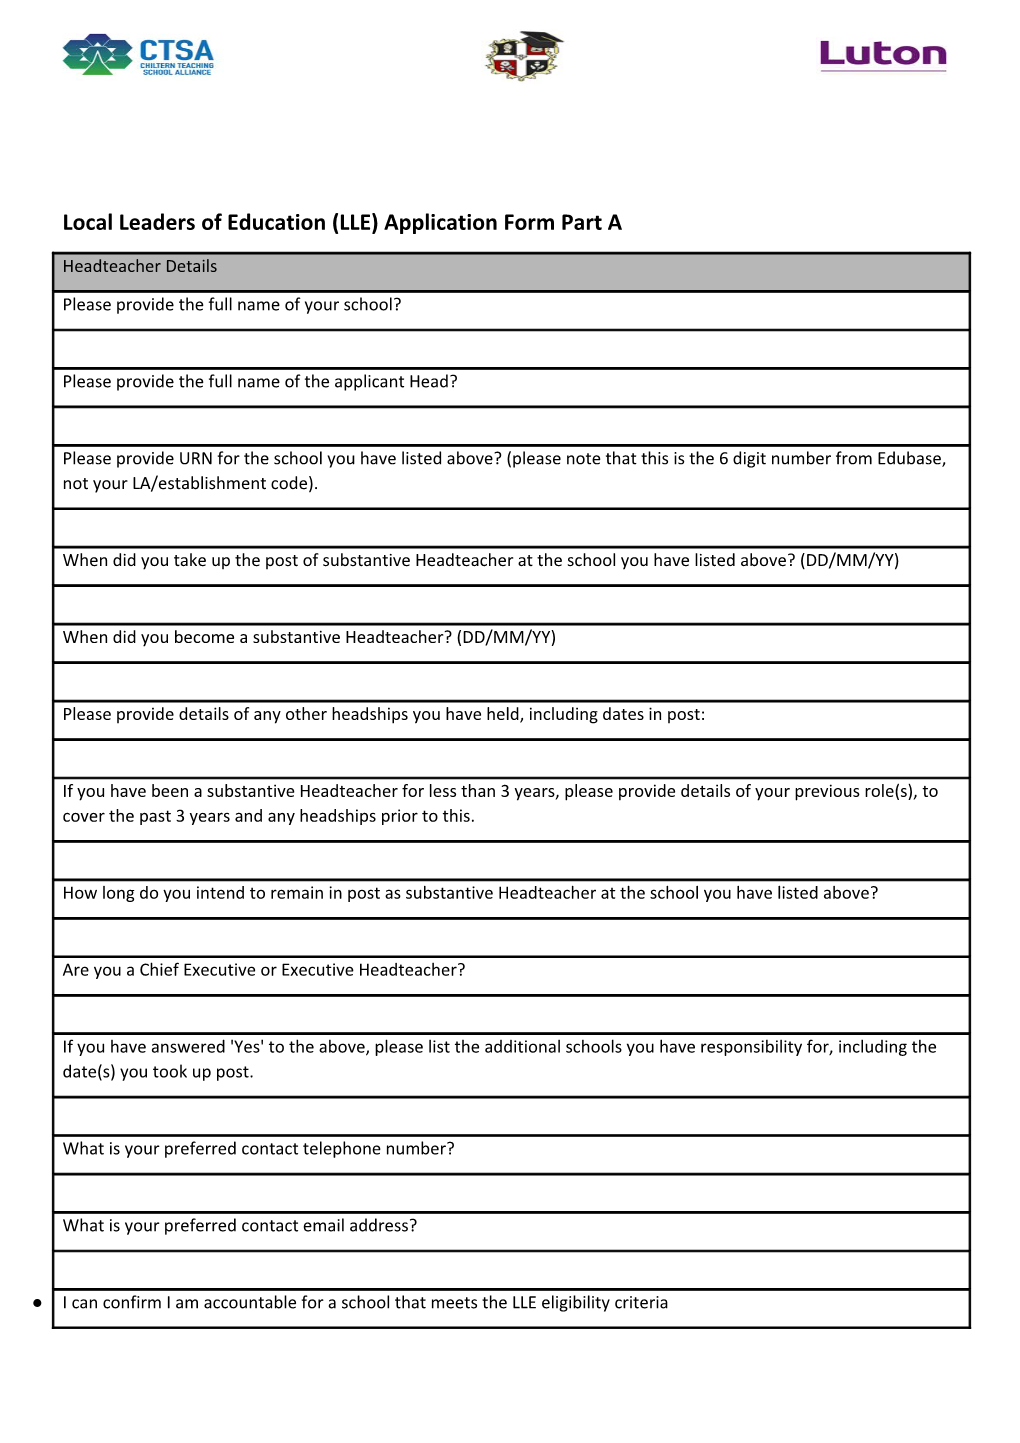 Local Leaders of Education (LLE) Application Form Part A